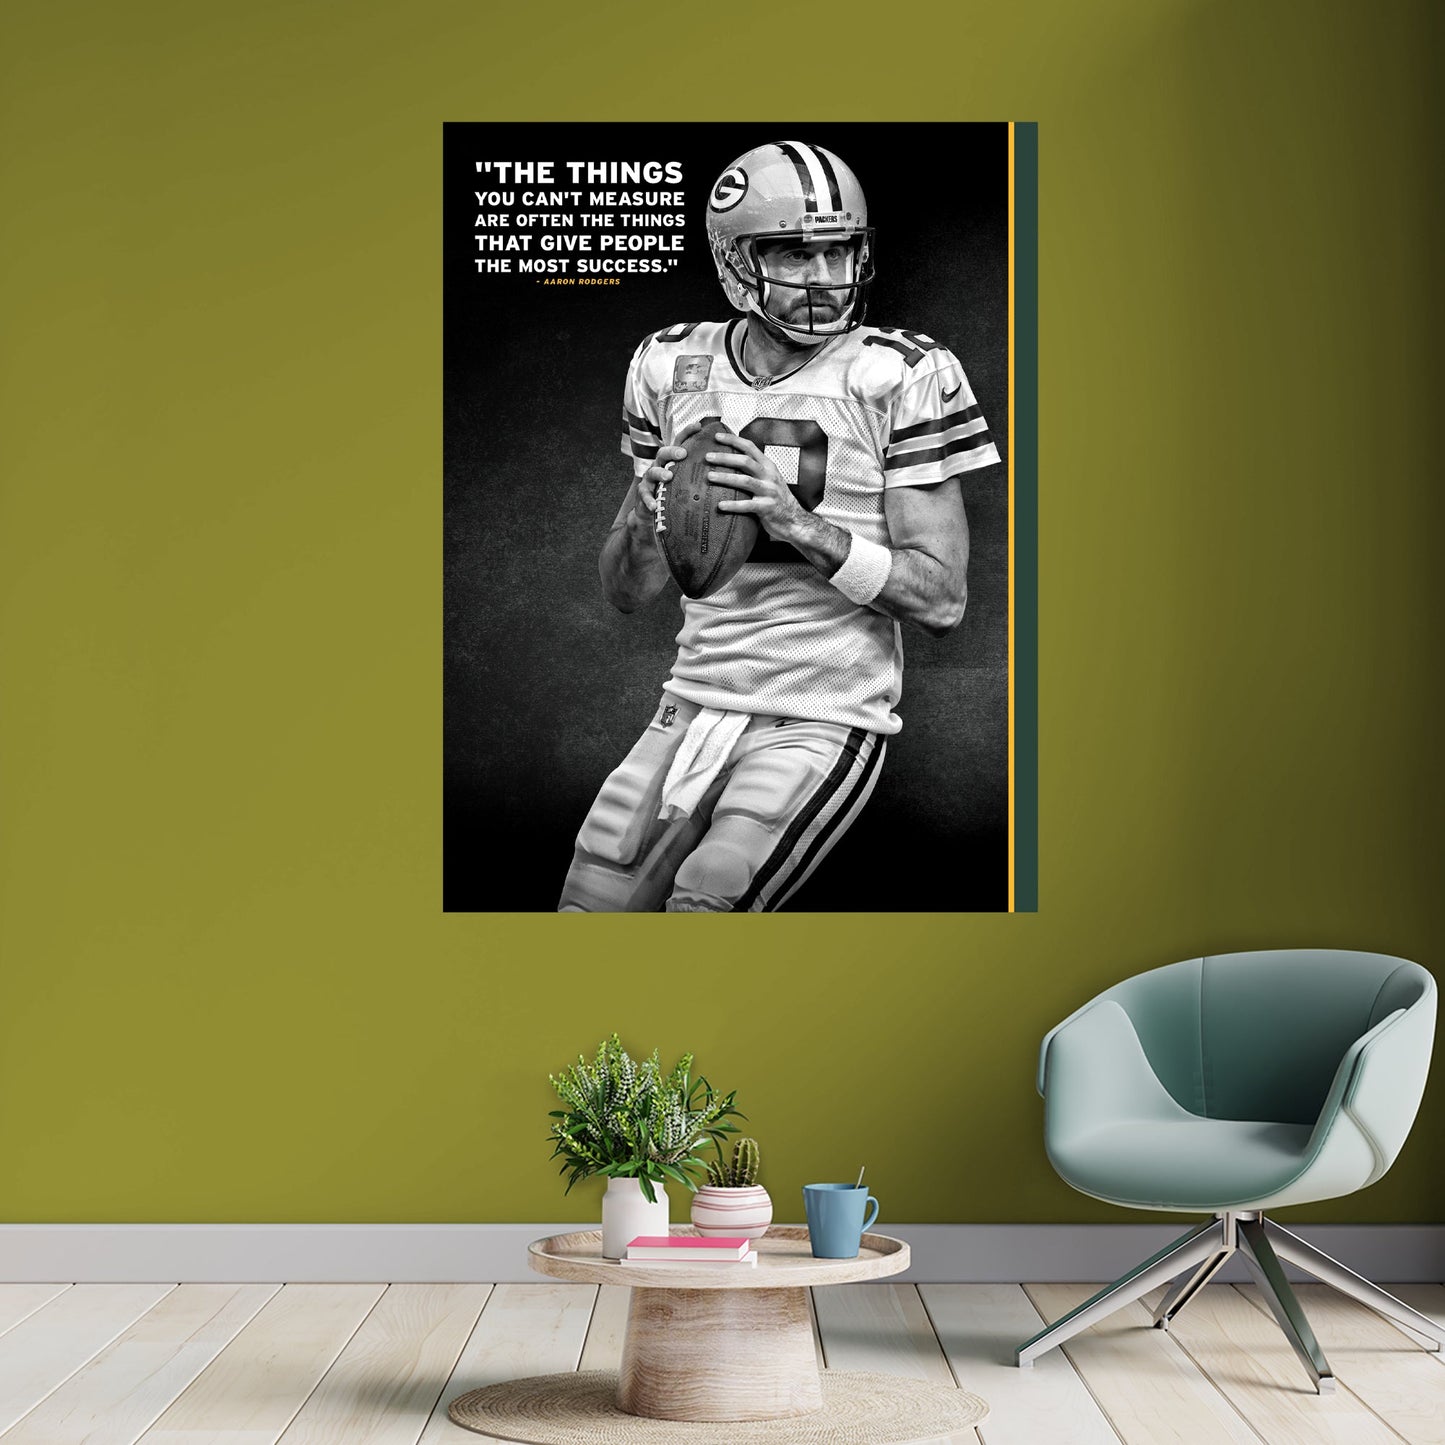 Green Bay Packers: Aaron Rodgers Inspirational Poster - Officially Licensed NFL Removable Adhesive Decal